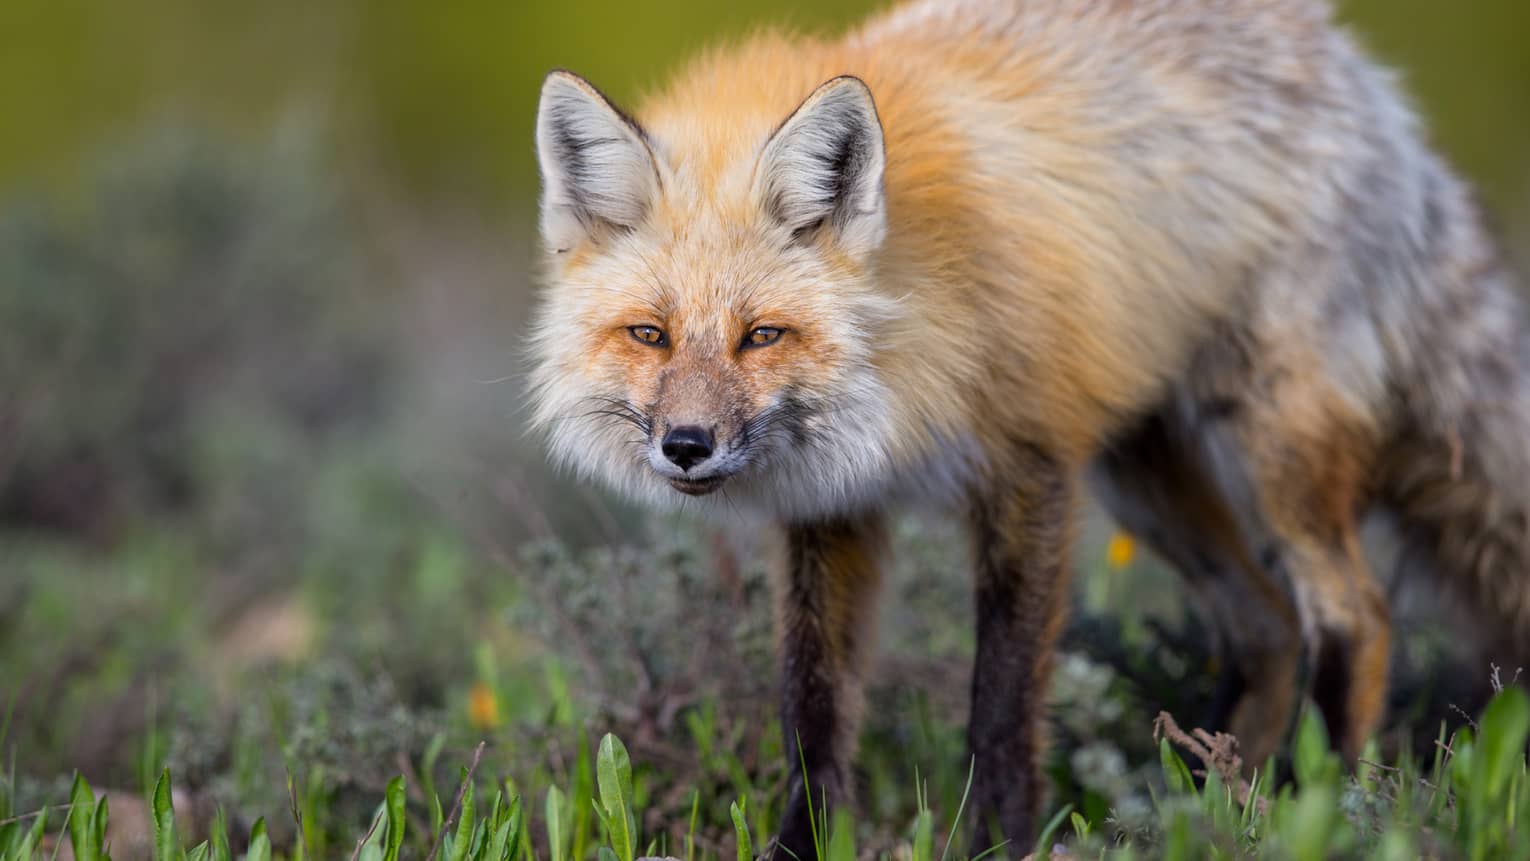 Close-up of furry orange fox standing in meadow